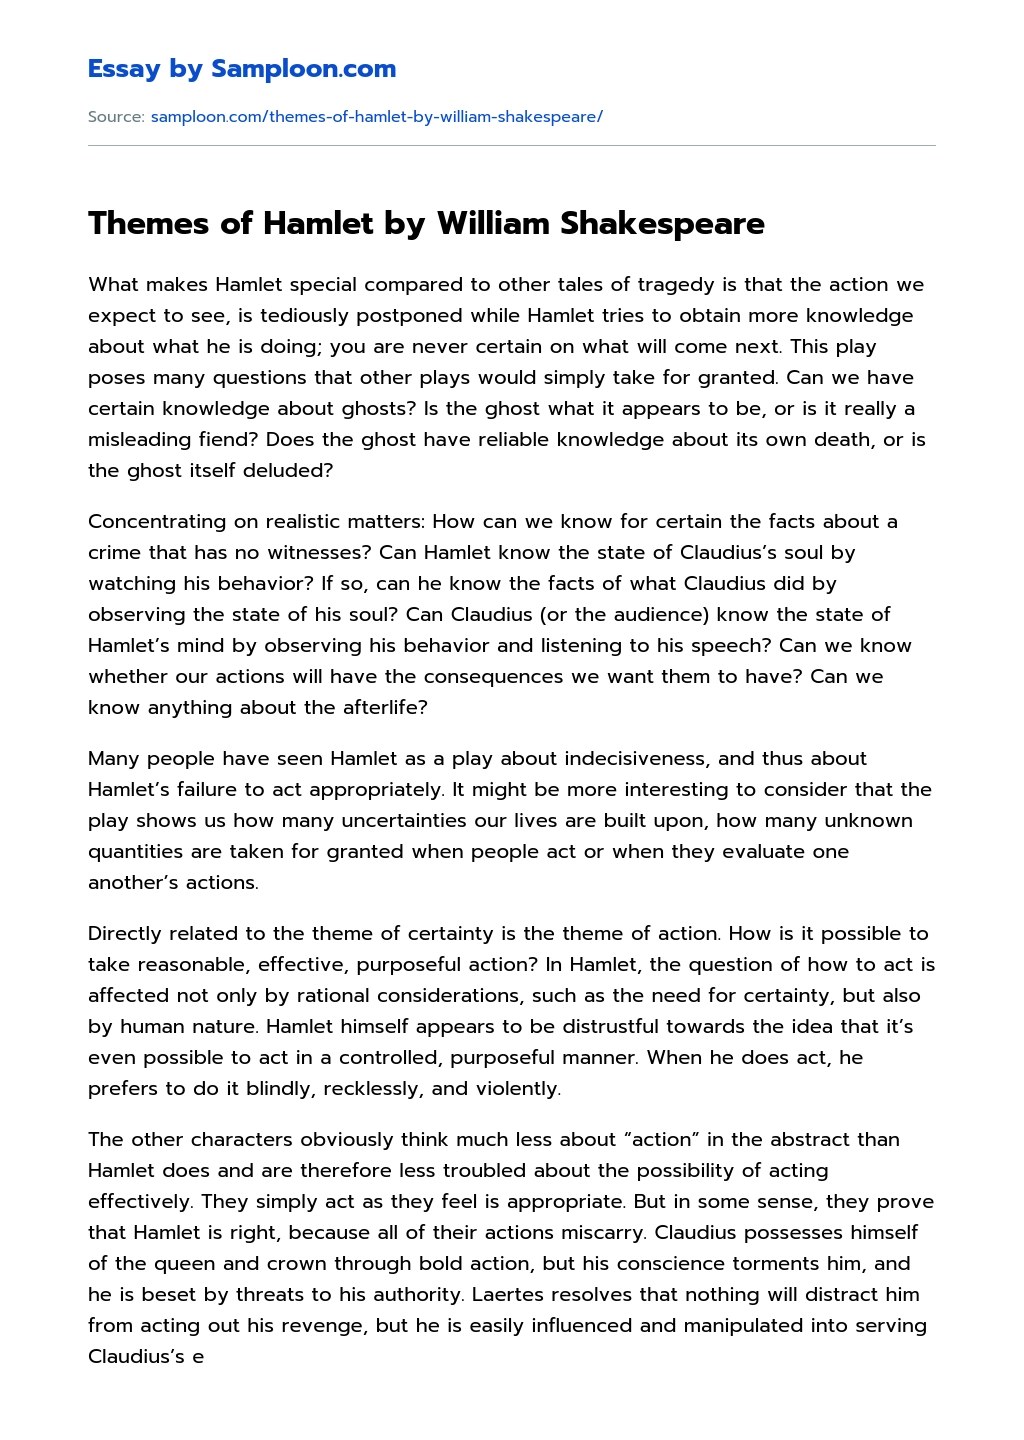 Themes of Hamlet by William Shakespeare essay